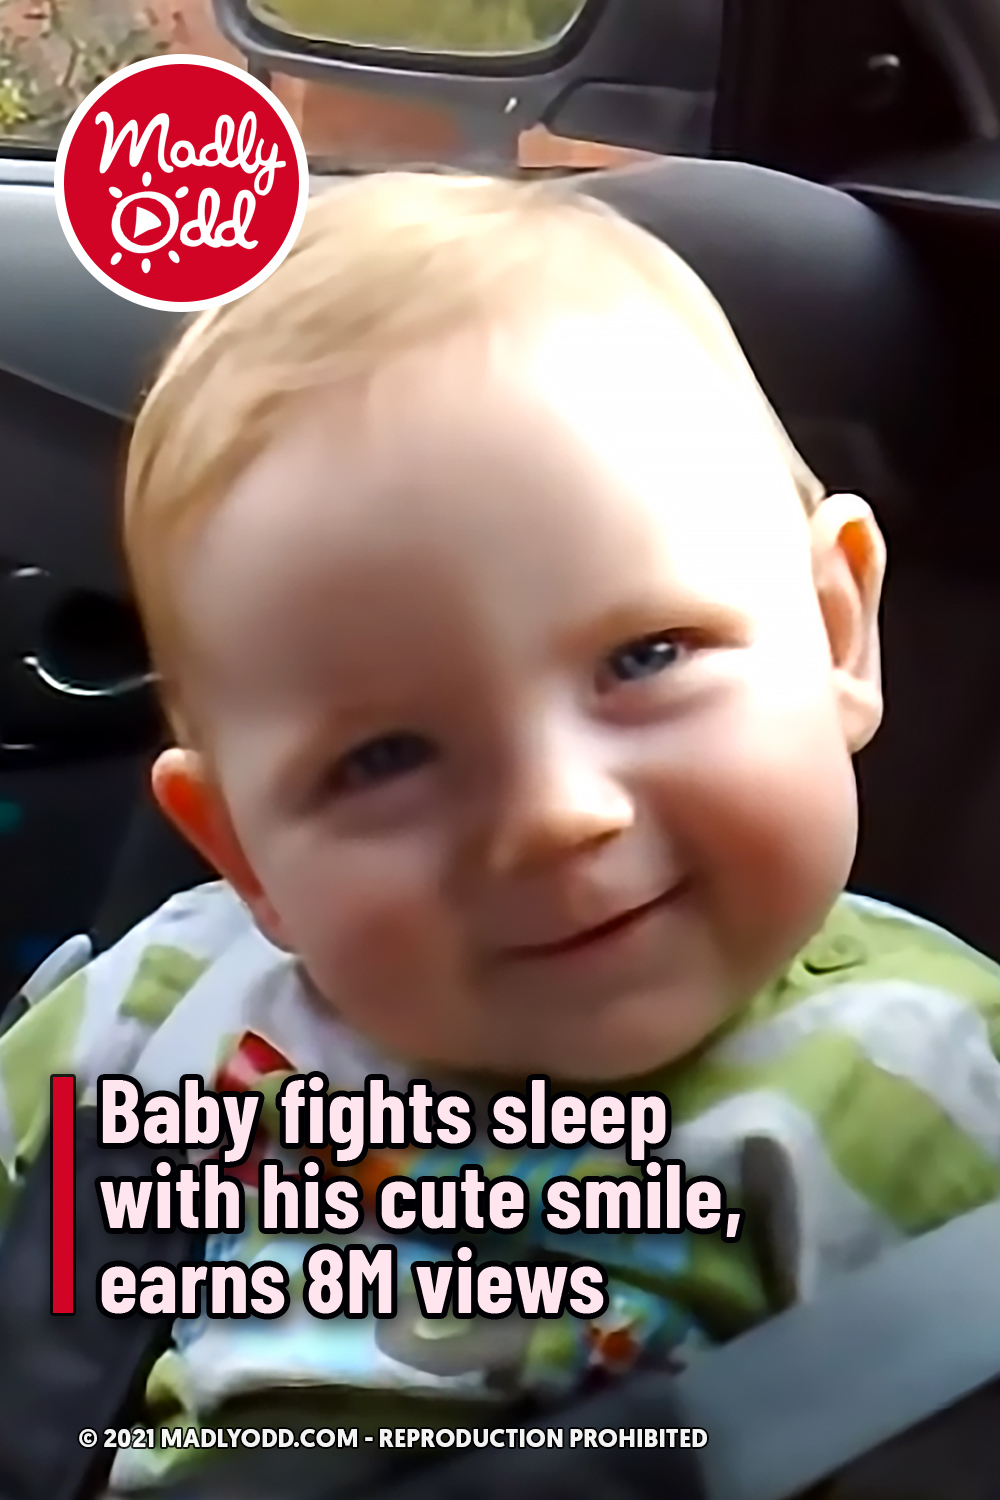 Baby fights sleep with his cute smile, earns 8M views